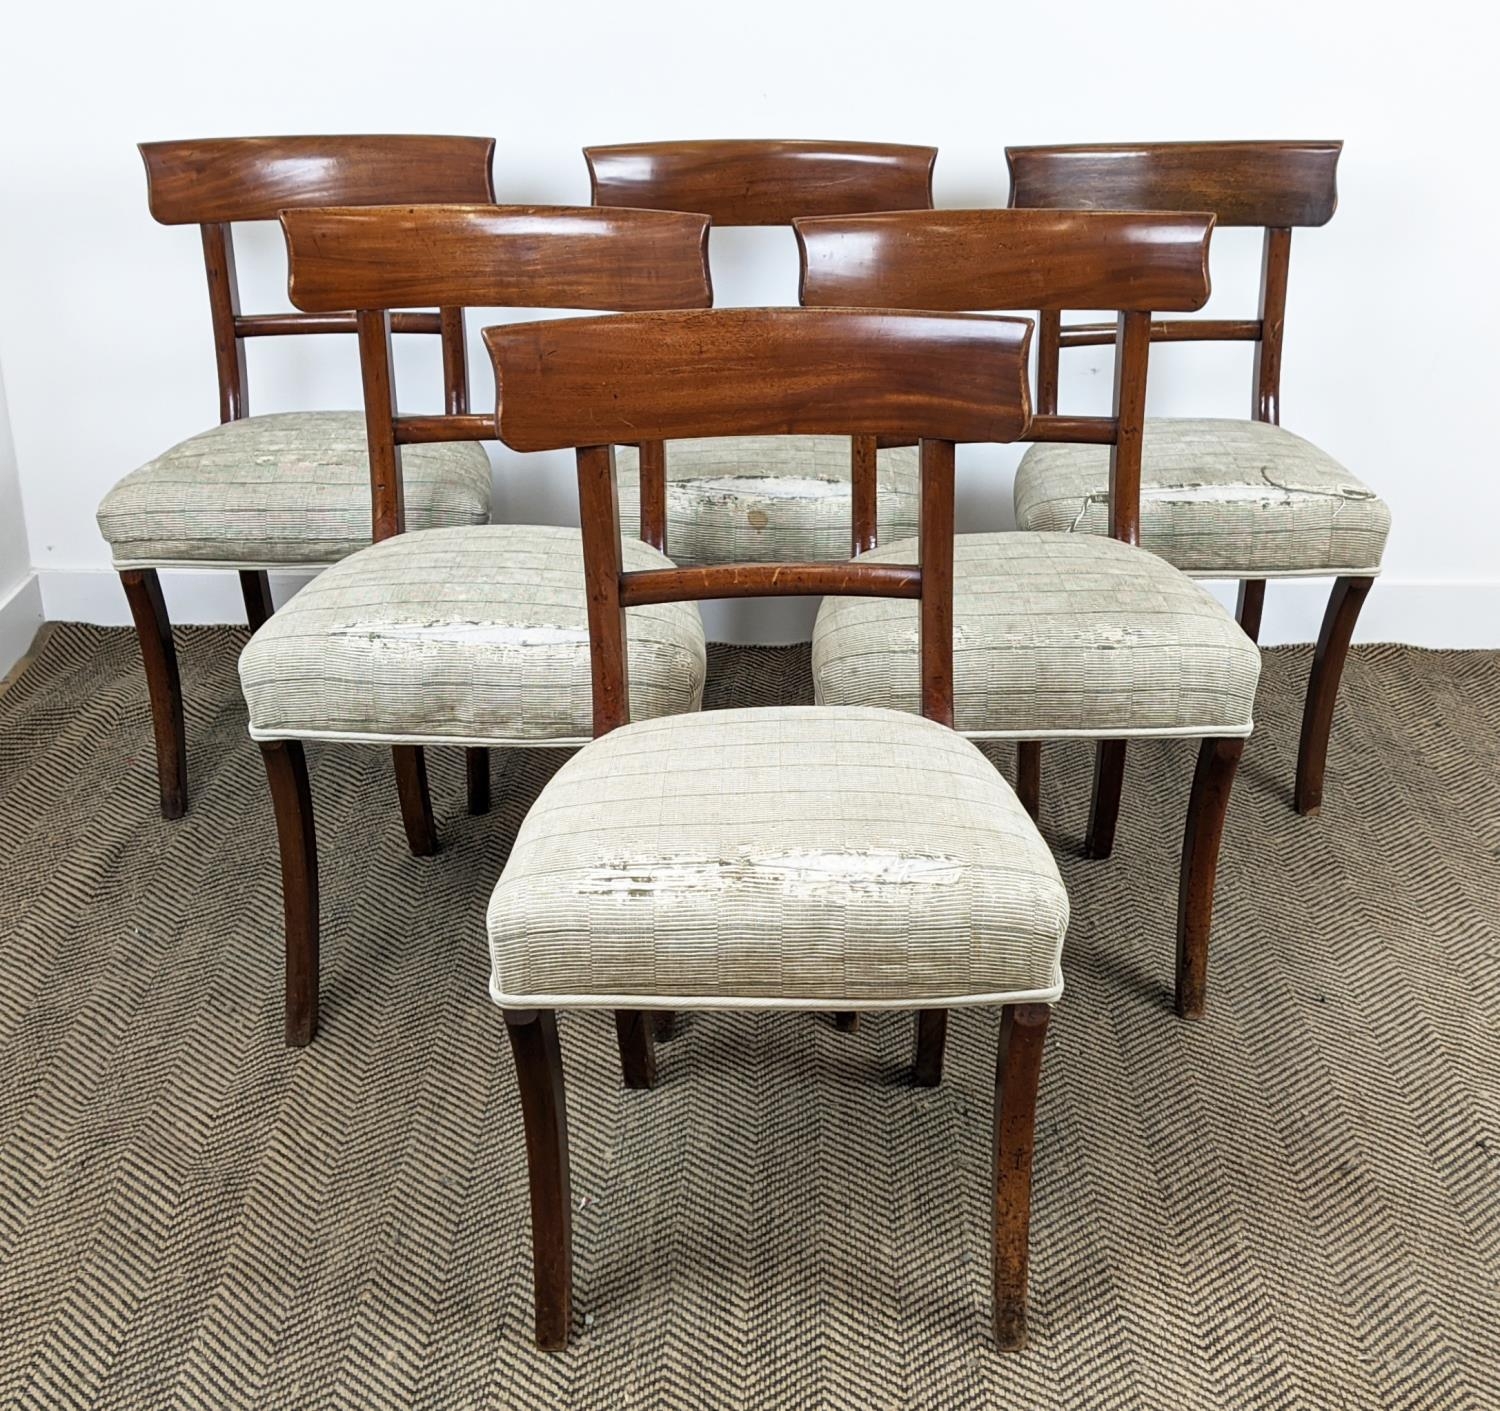 DINING CHAIRS, a set of six, circa 1830, mahogany with stuffover seats, 86cm H x 49cm x 48cm. (6)